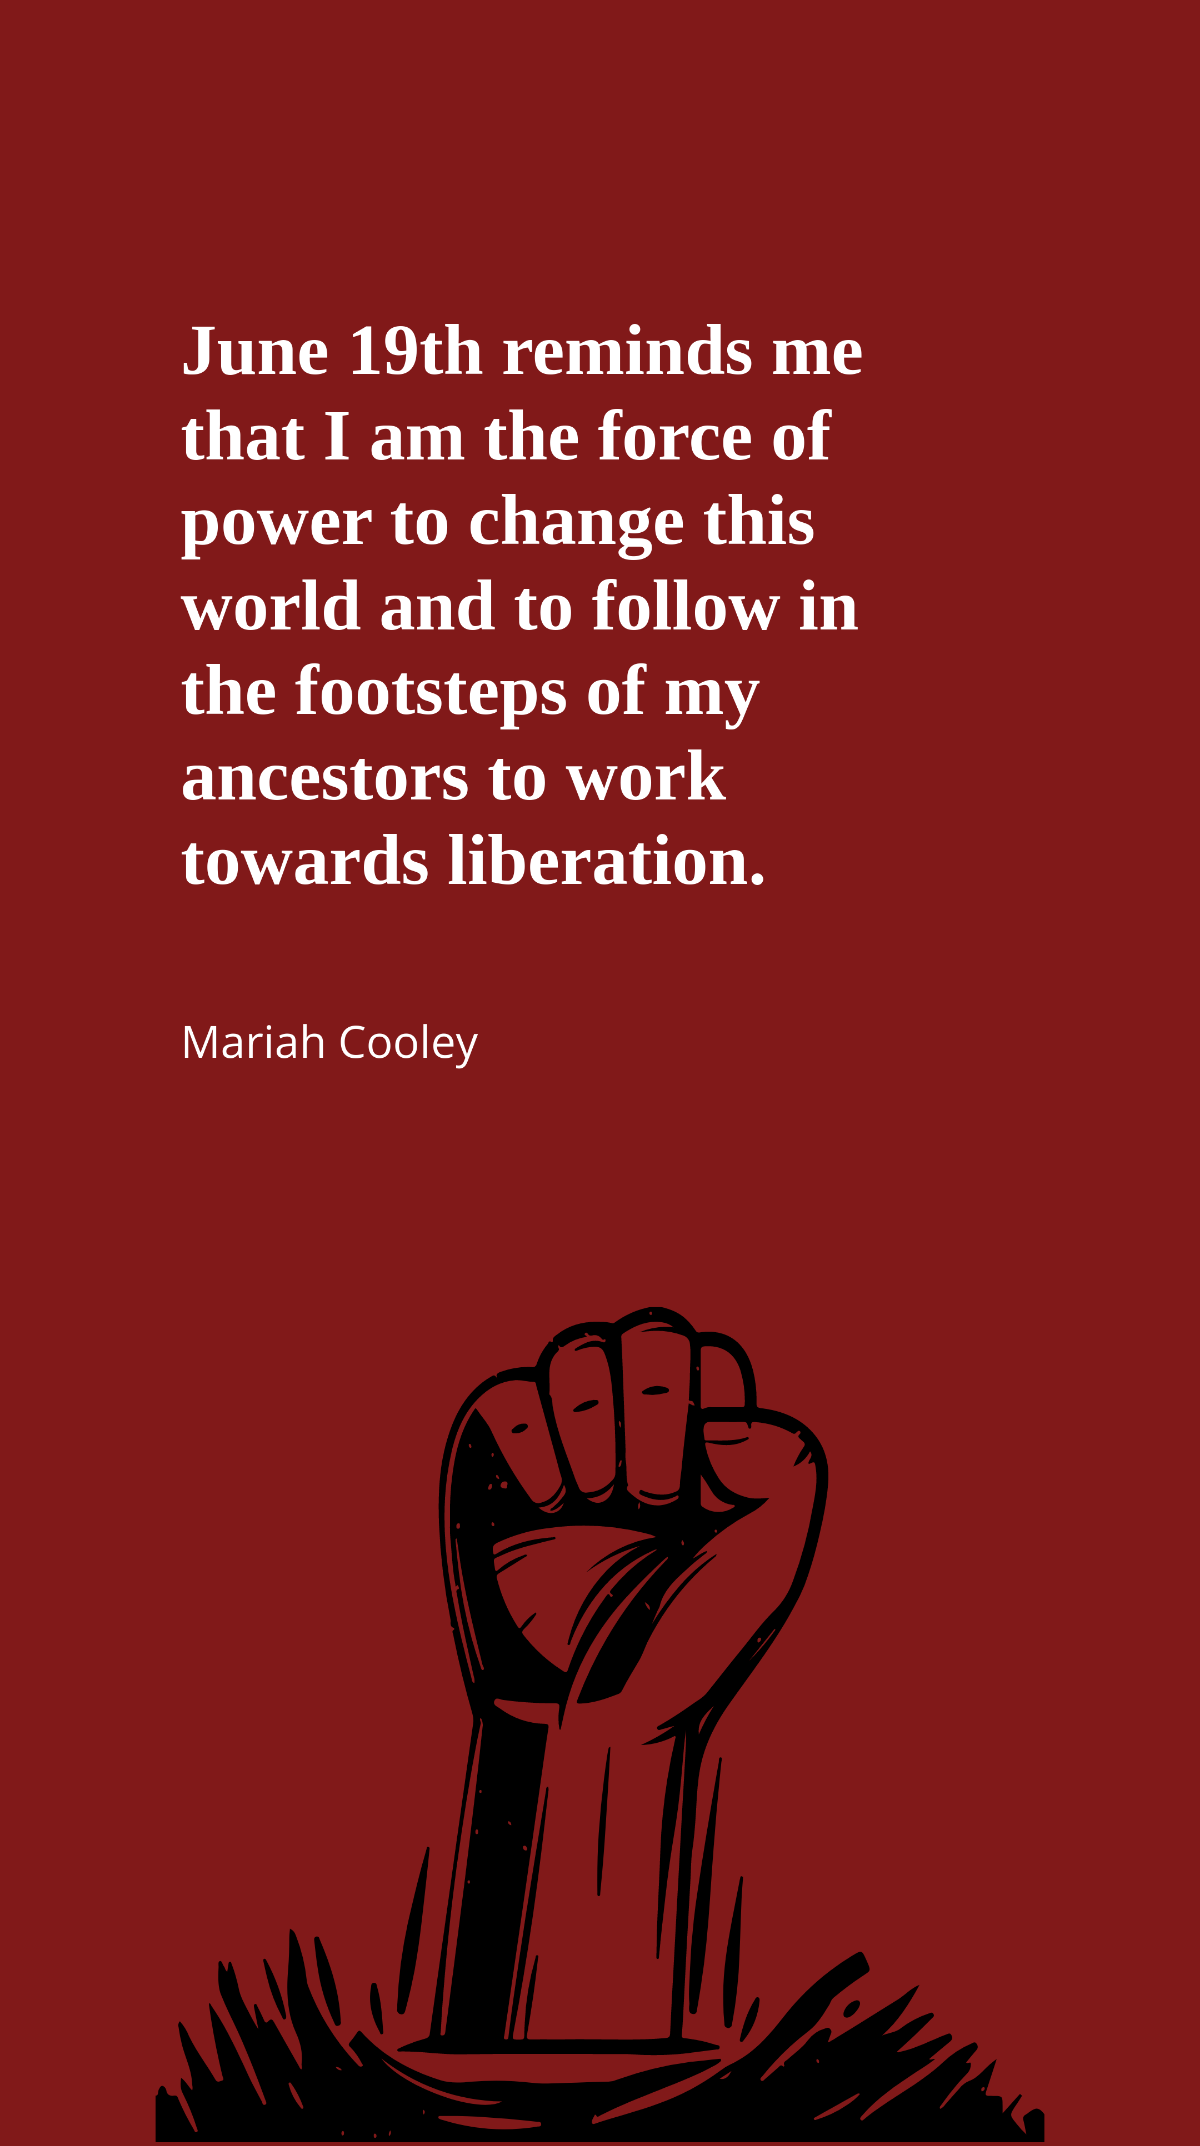 Mariah Cooley - June 19th reminds me that I am the force of power to change this world and to follow in the footsteps of my ancestors to work towards liberation. Template